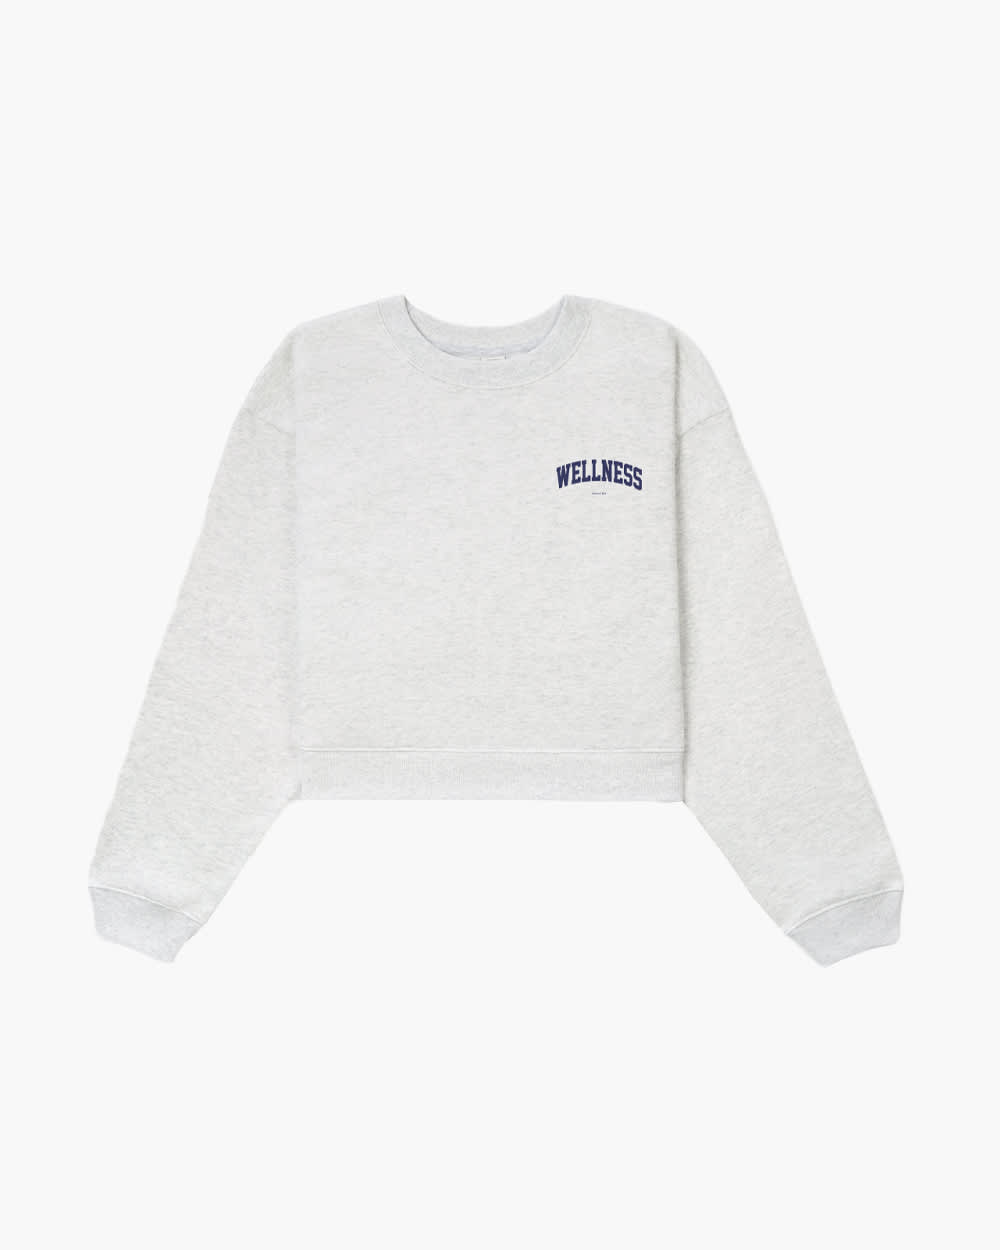 SPORTY AND RICH WELLNESS IVY CROPPED CREWNECK